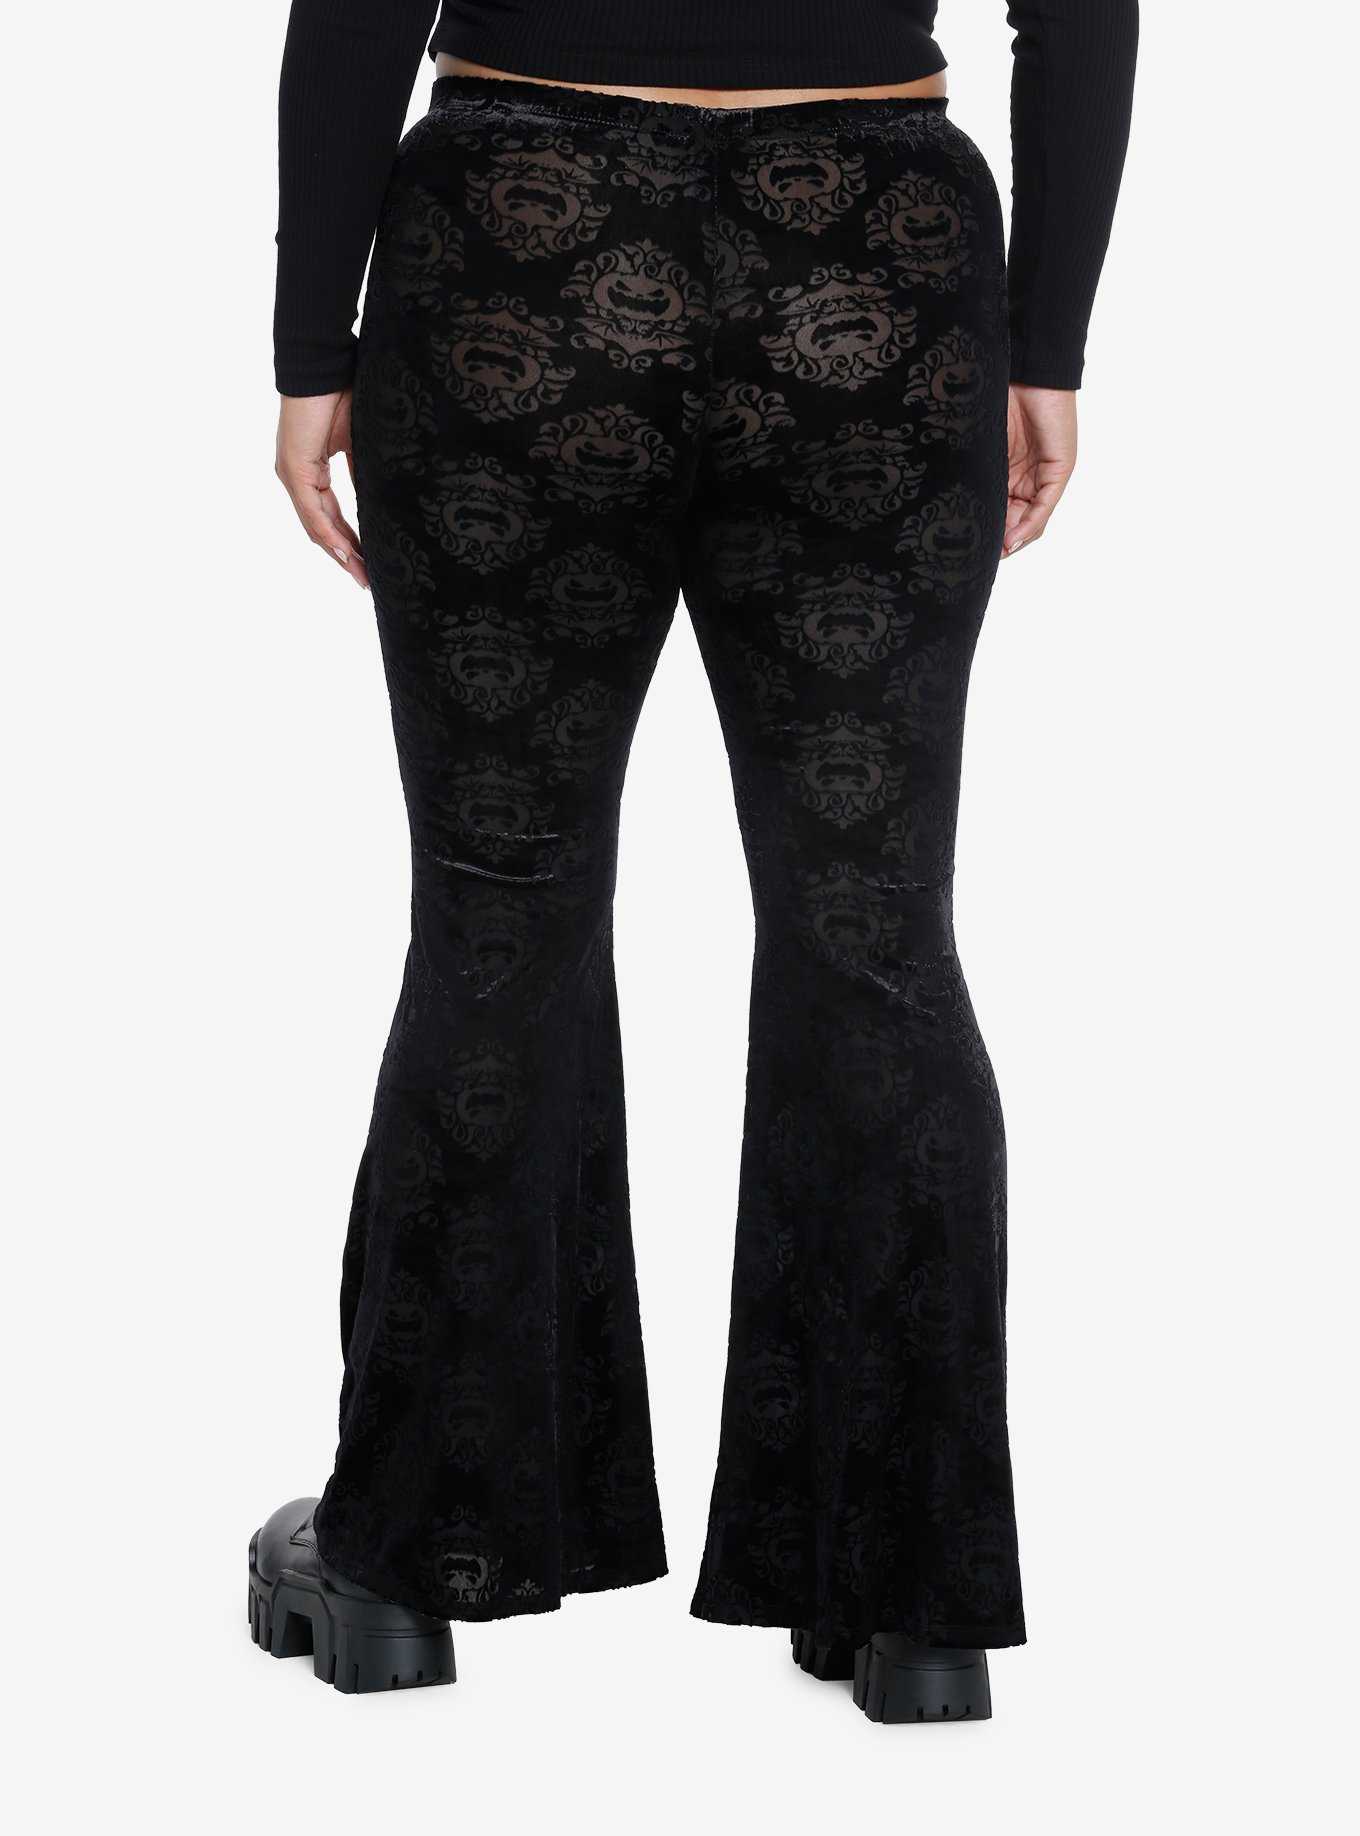 Hot Topic Black Side Chain Button Flare Pants